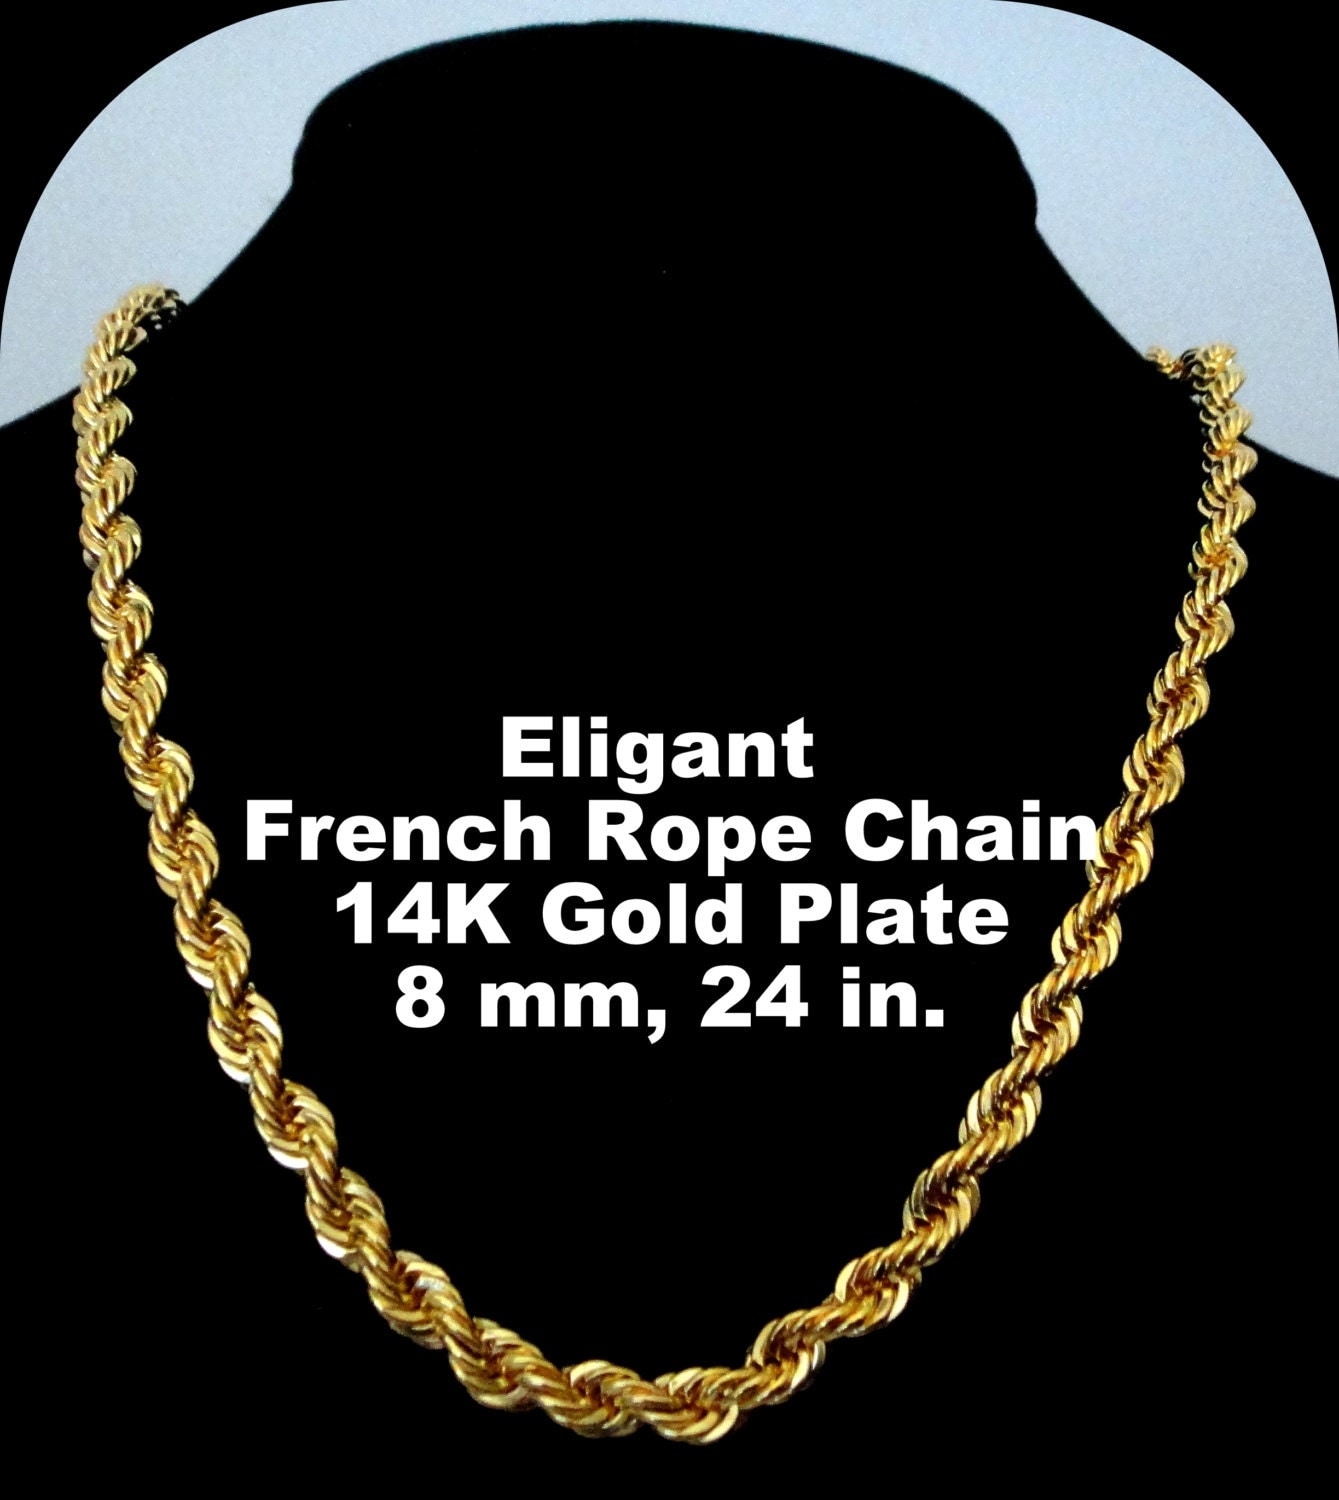 Rope Chain 14k Gold Plate Gep 24 In 8mm By Goldenartifacts 0710